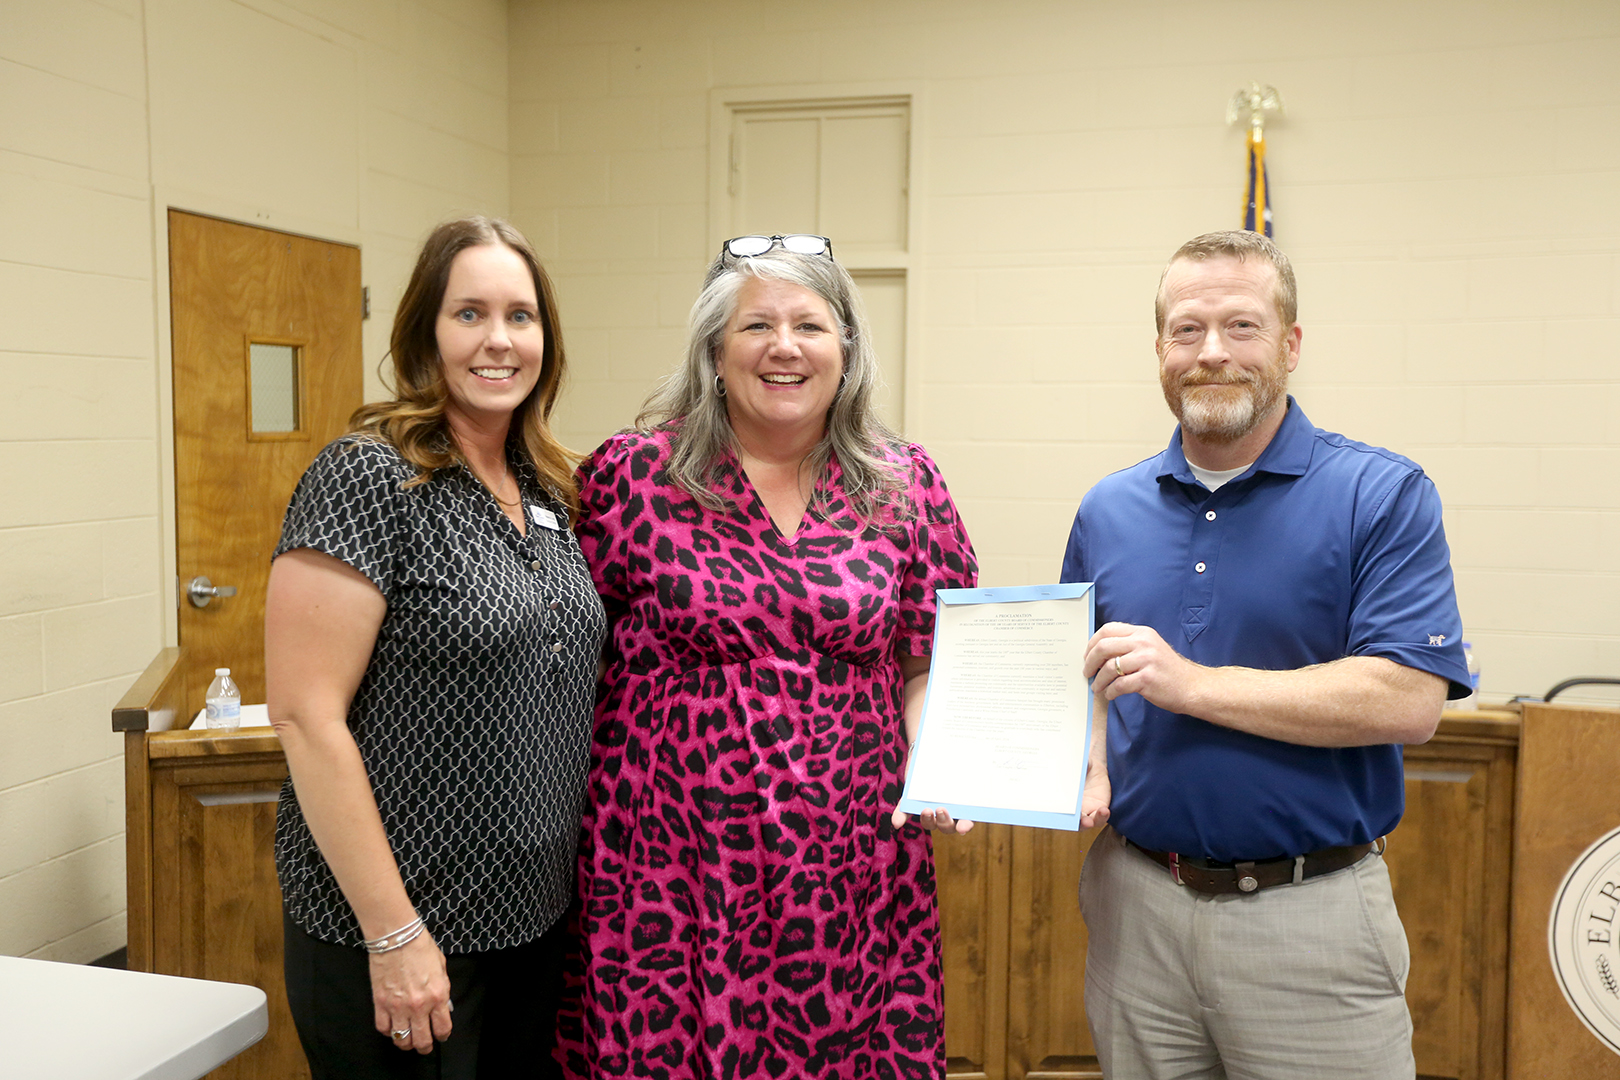 The Elbert County Chamber of Commerce's centennial anniversary was celebrated at all levels over the past week as the City of Elberton, Elbert County Board of Commissioners and State House Rep. Rob Leverett honored the Chamber with resolutions and proclamations. Pictured are (L-R) Chamber Executive Director Rebecca Long, Chamber Chair Susan Fortson and Commission Chairman Lee Vaughn. (Photo by Scoggins)